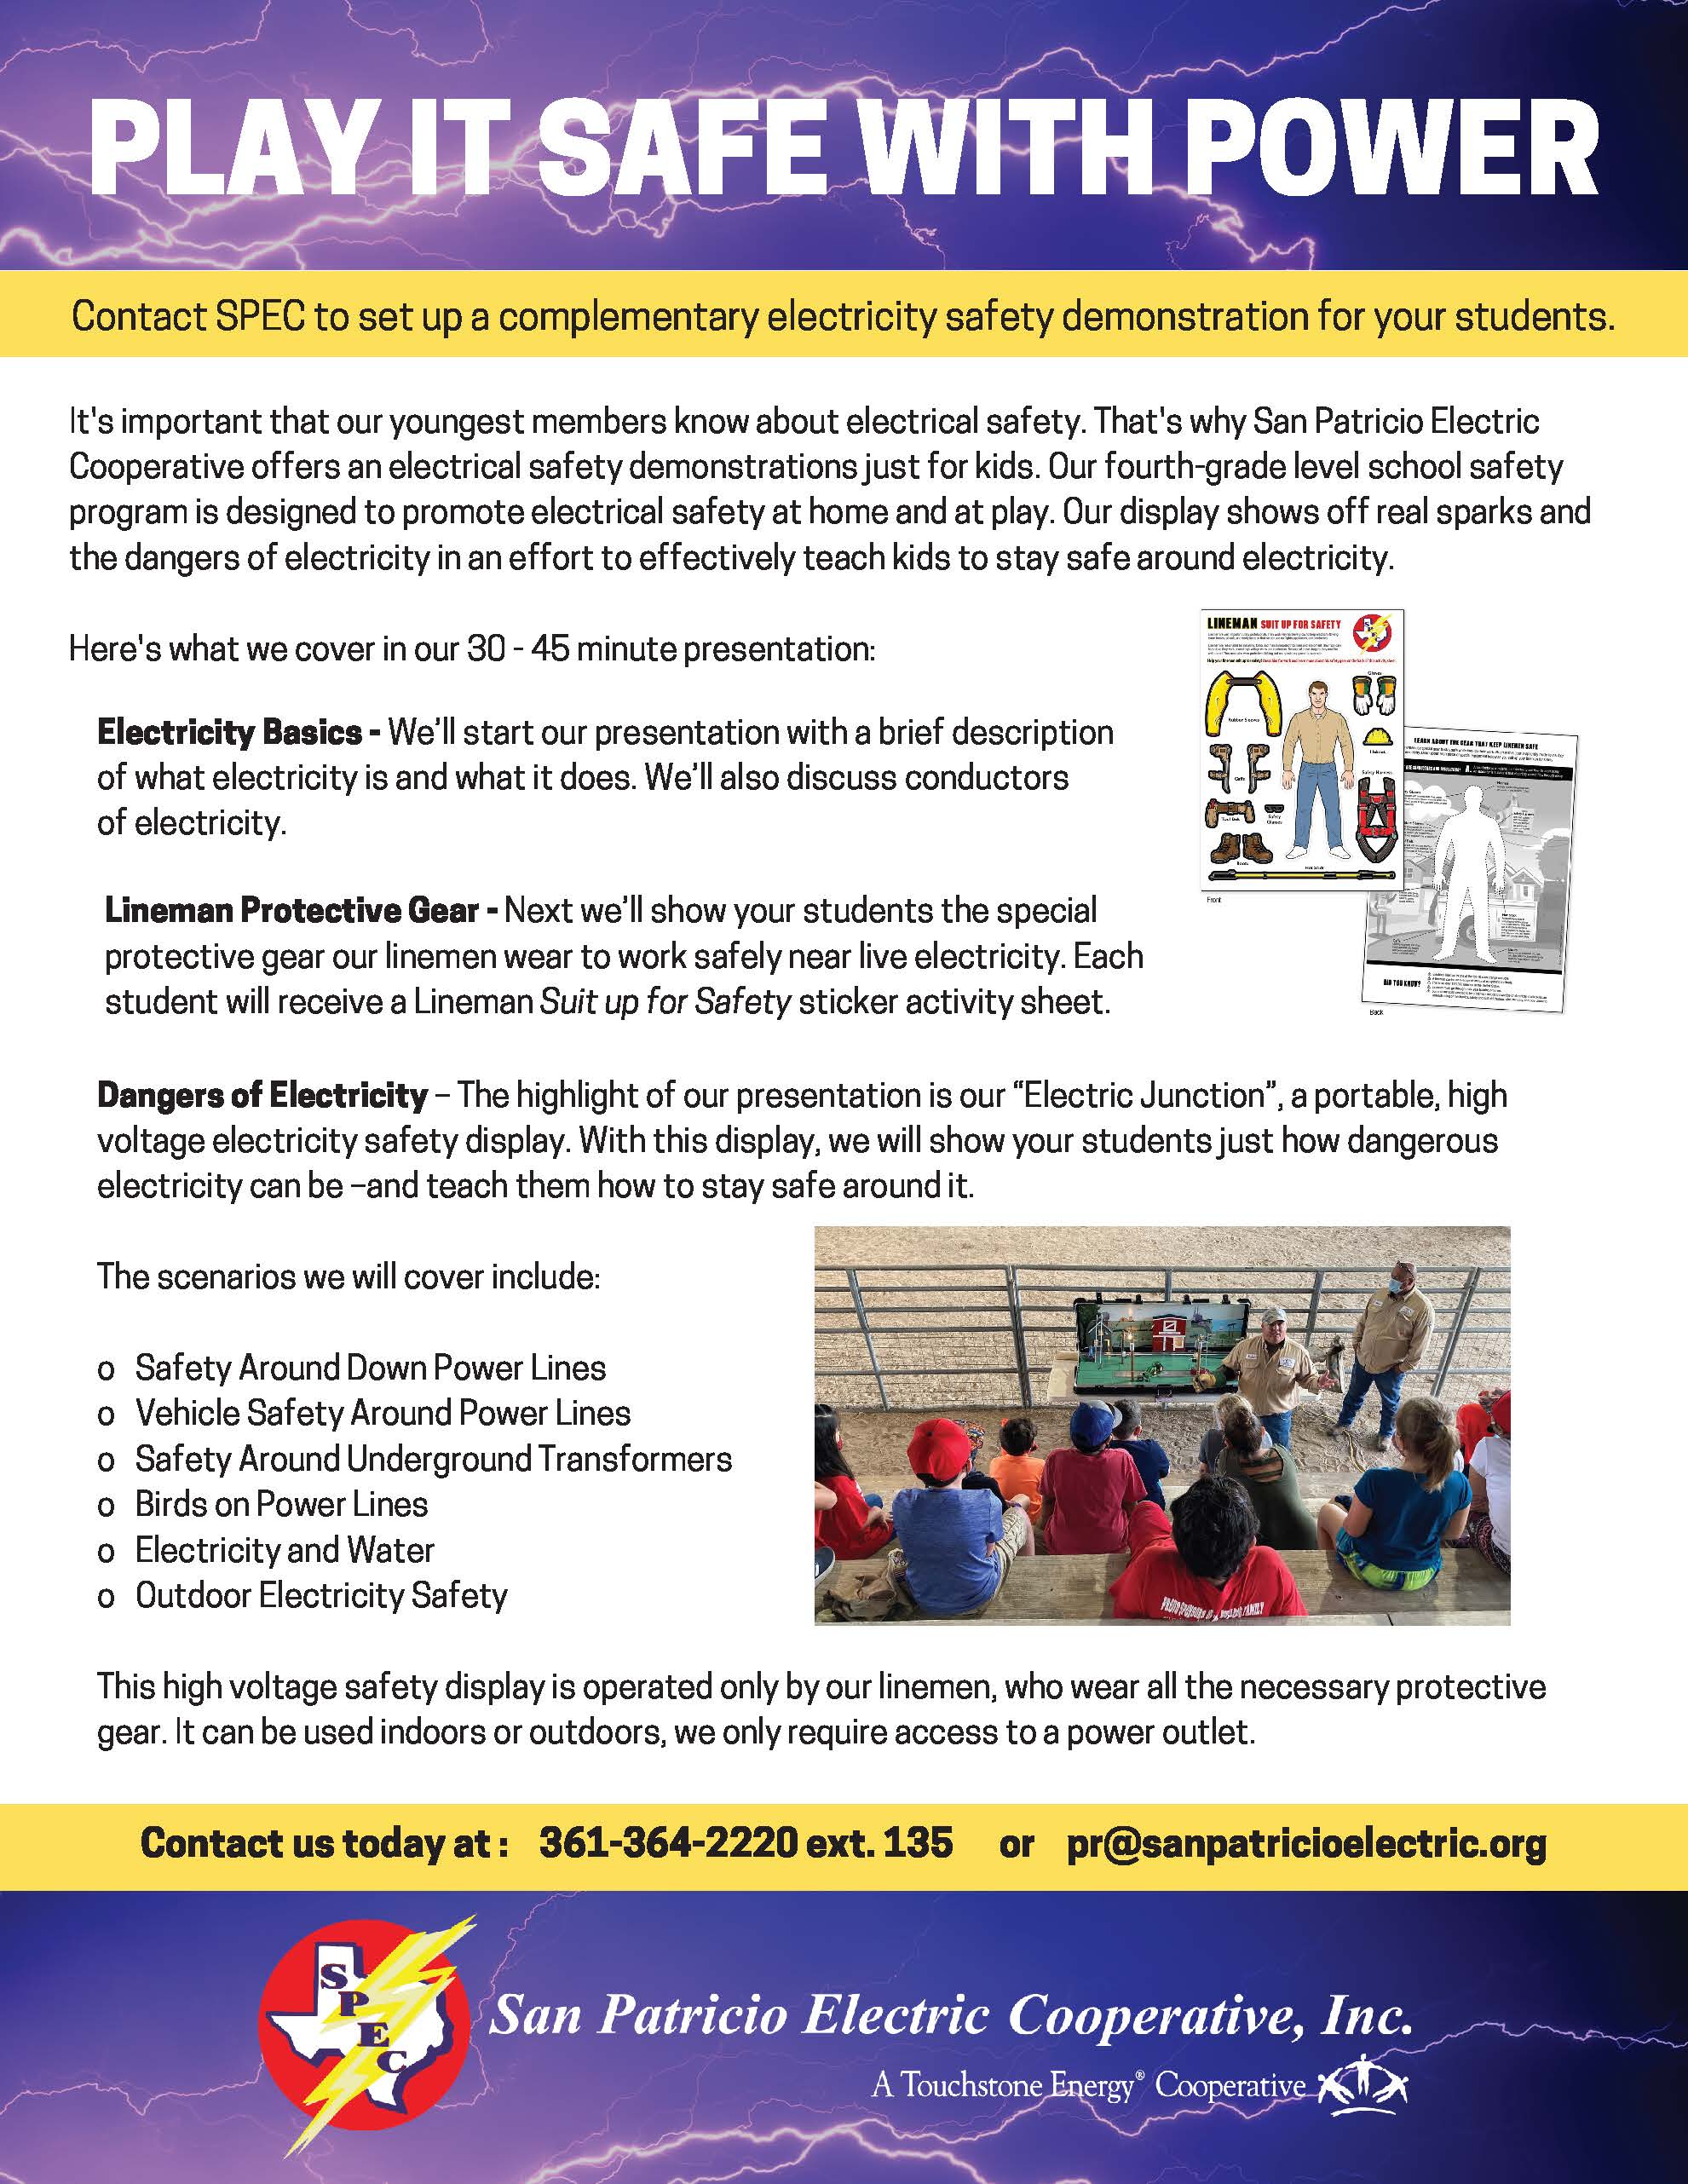 Electricity Safety Program for Elementary